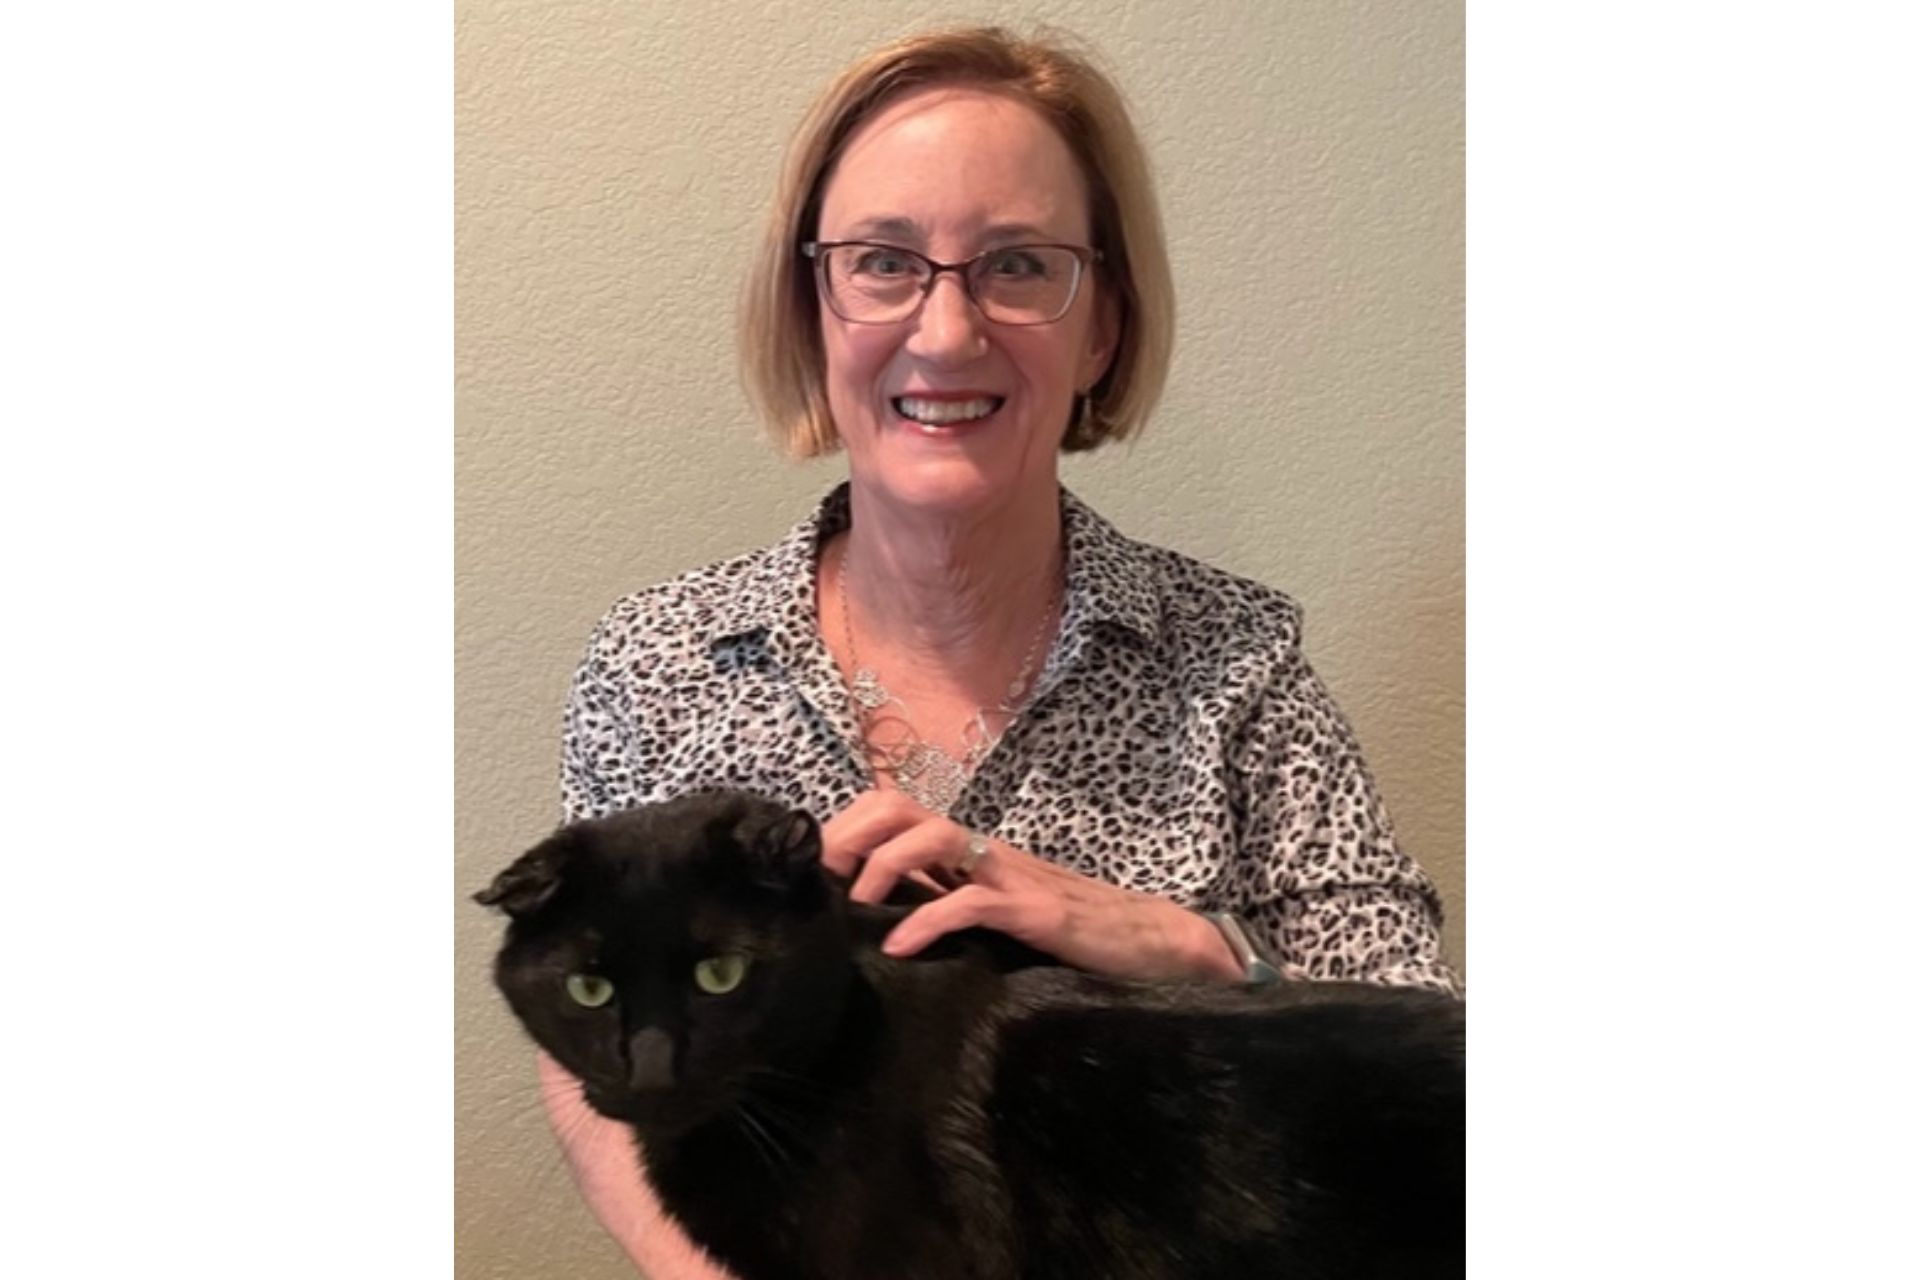 a black cat and a woman are pictured together